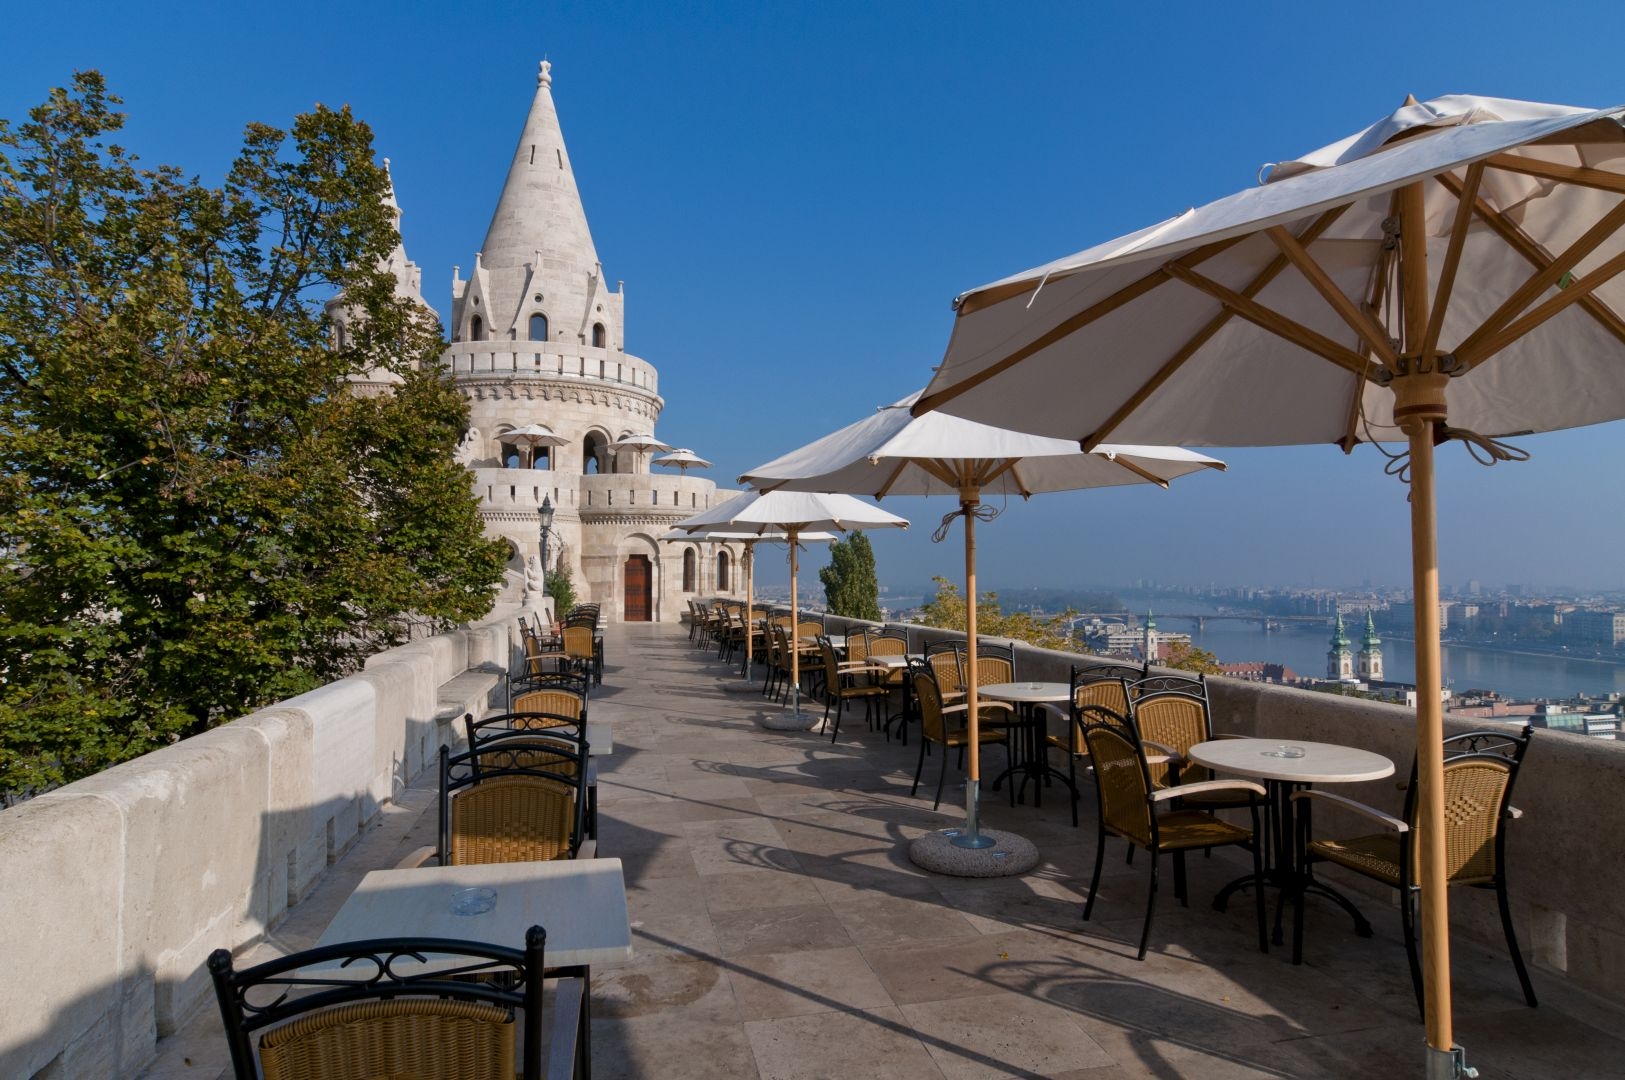 The outdoor area of the Fisherman's Bastion restaurant